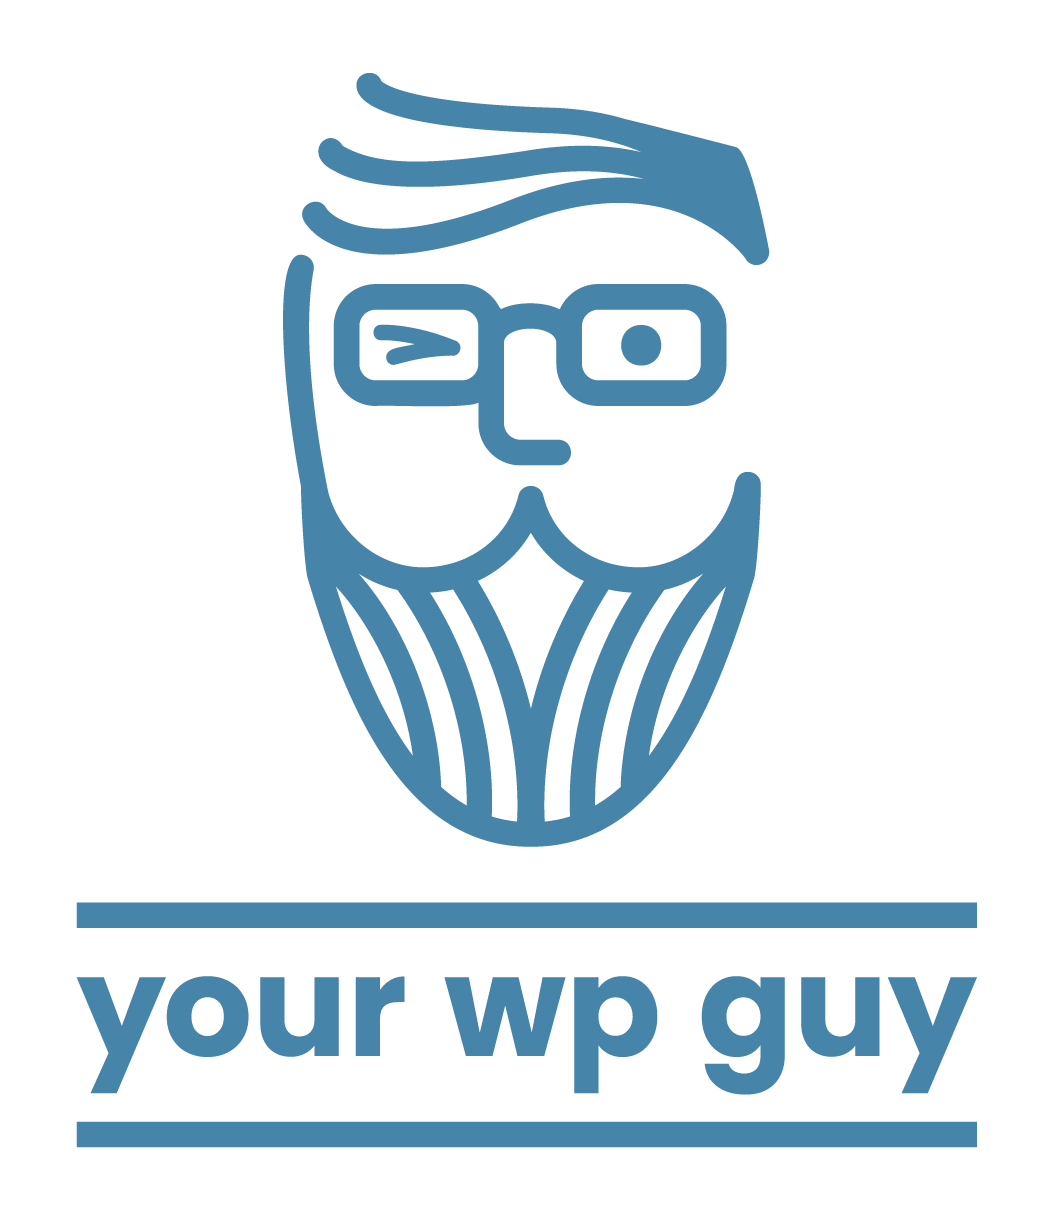 In a World of Website Woes, Your WP Guy Takes Home Award for Being the Best